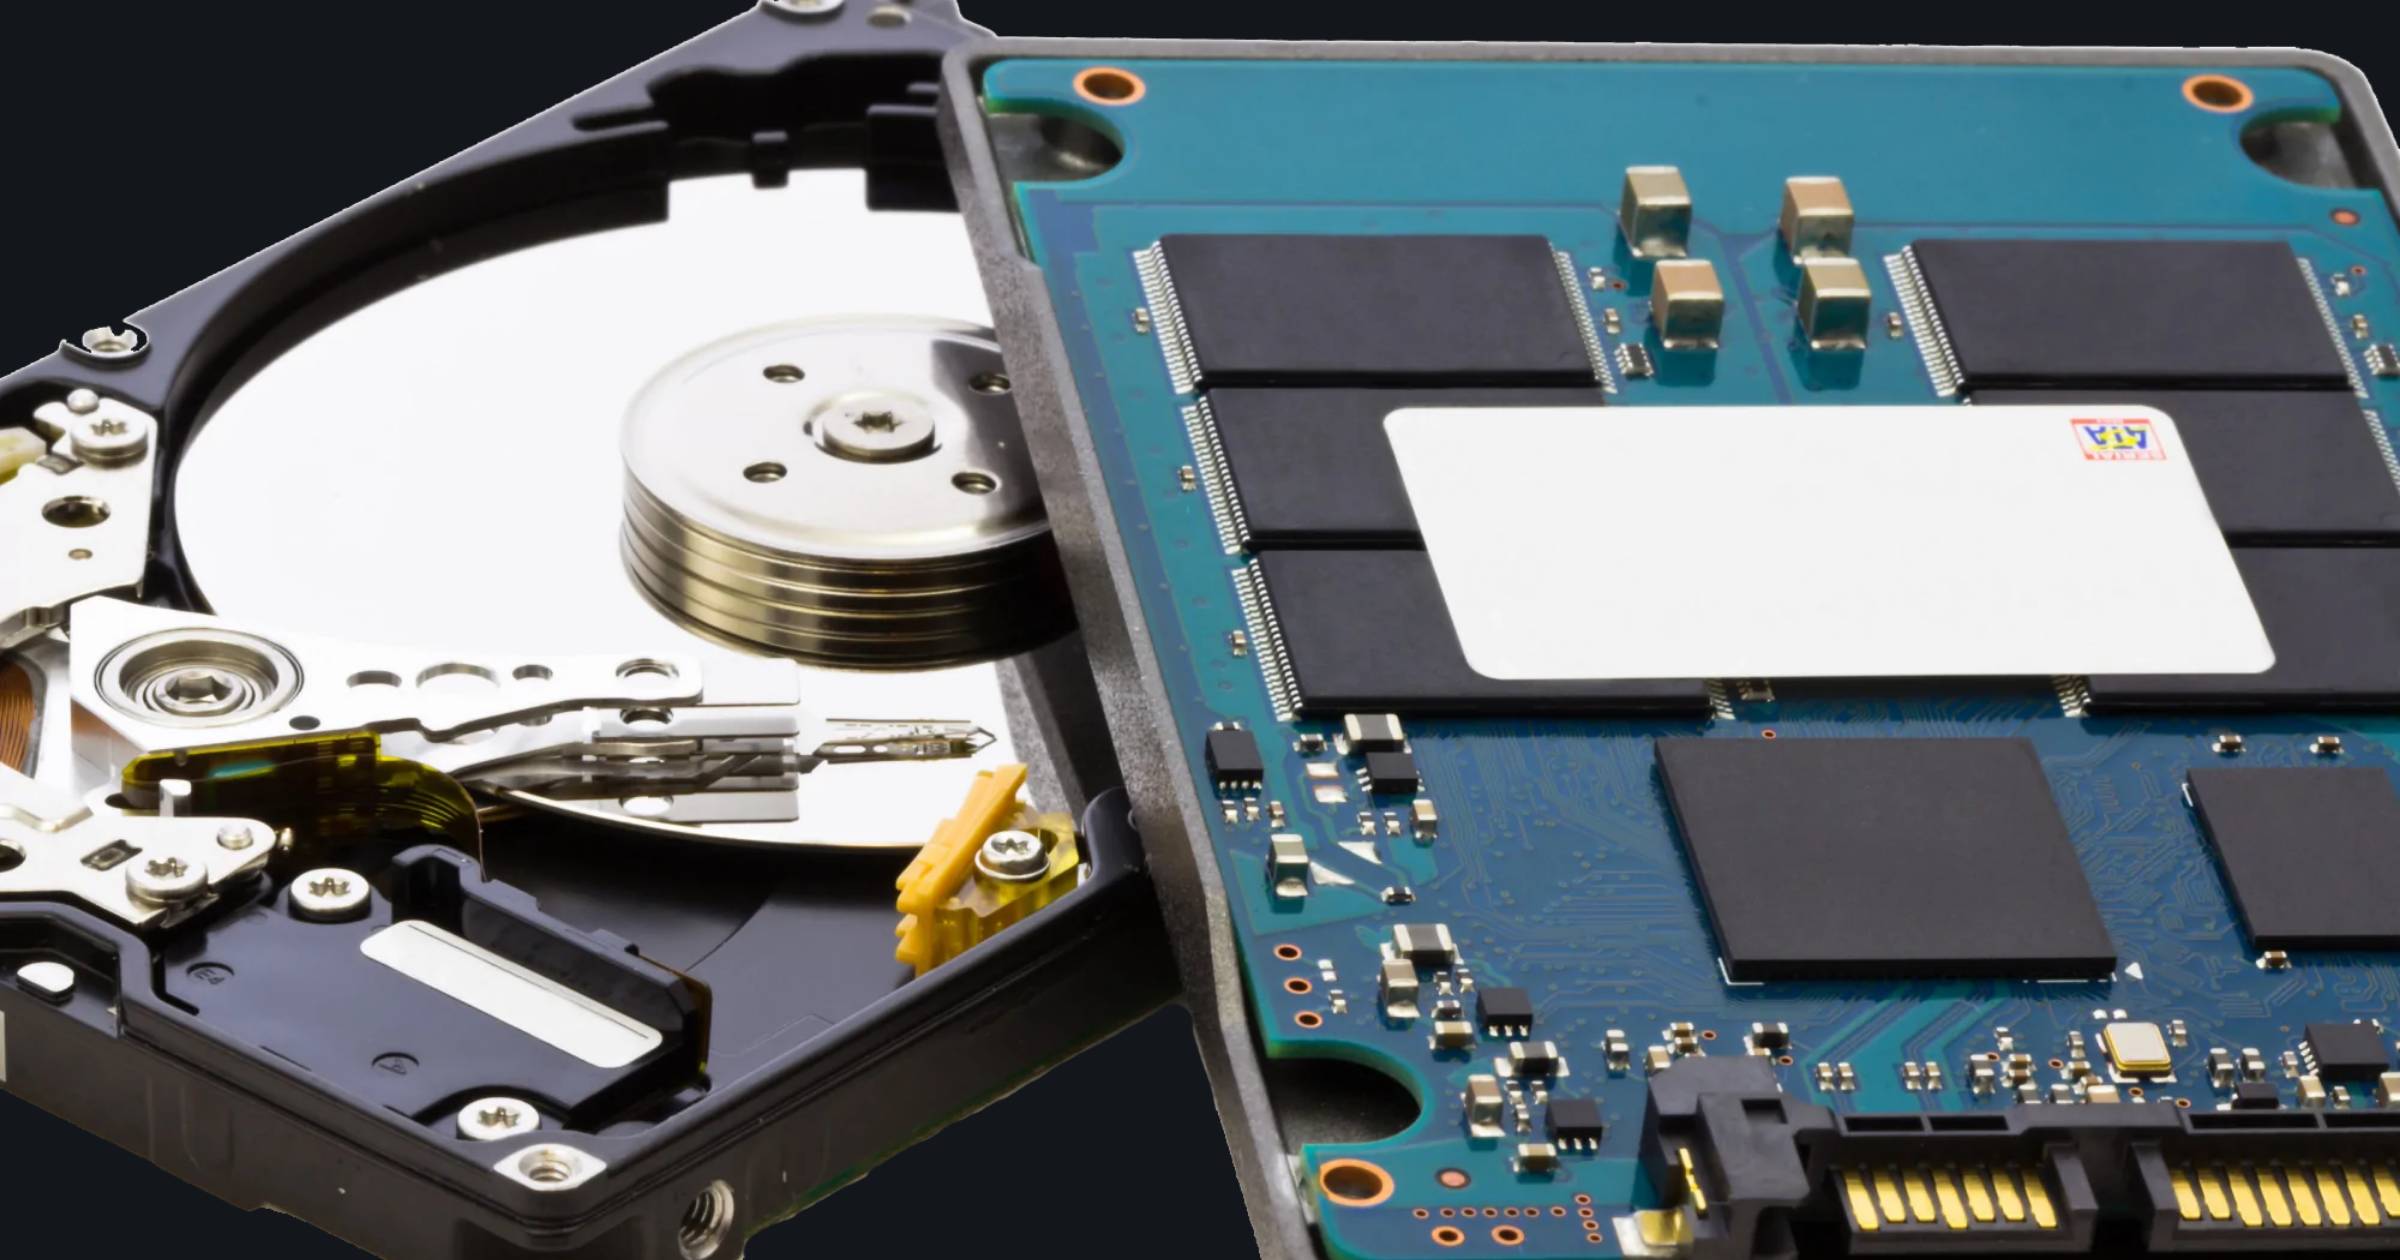 SSD Vs HDD For Gaming - What's The Difference